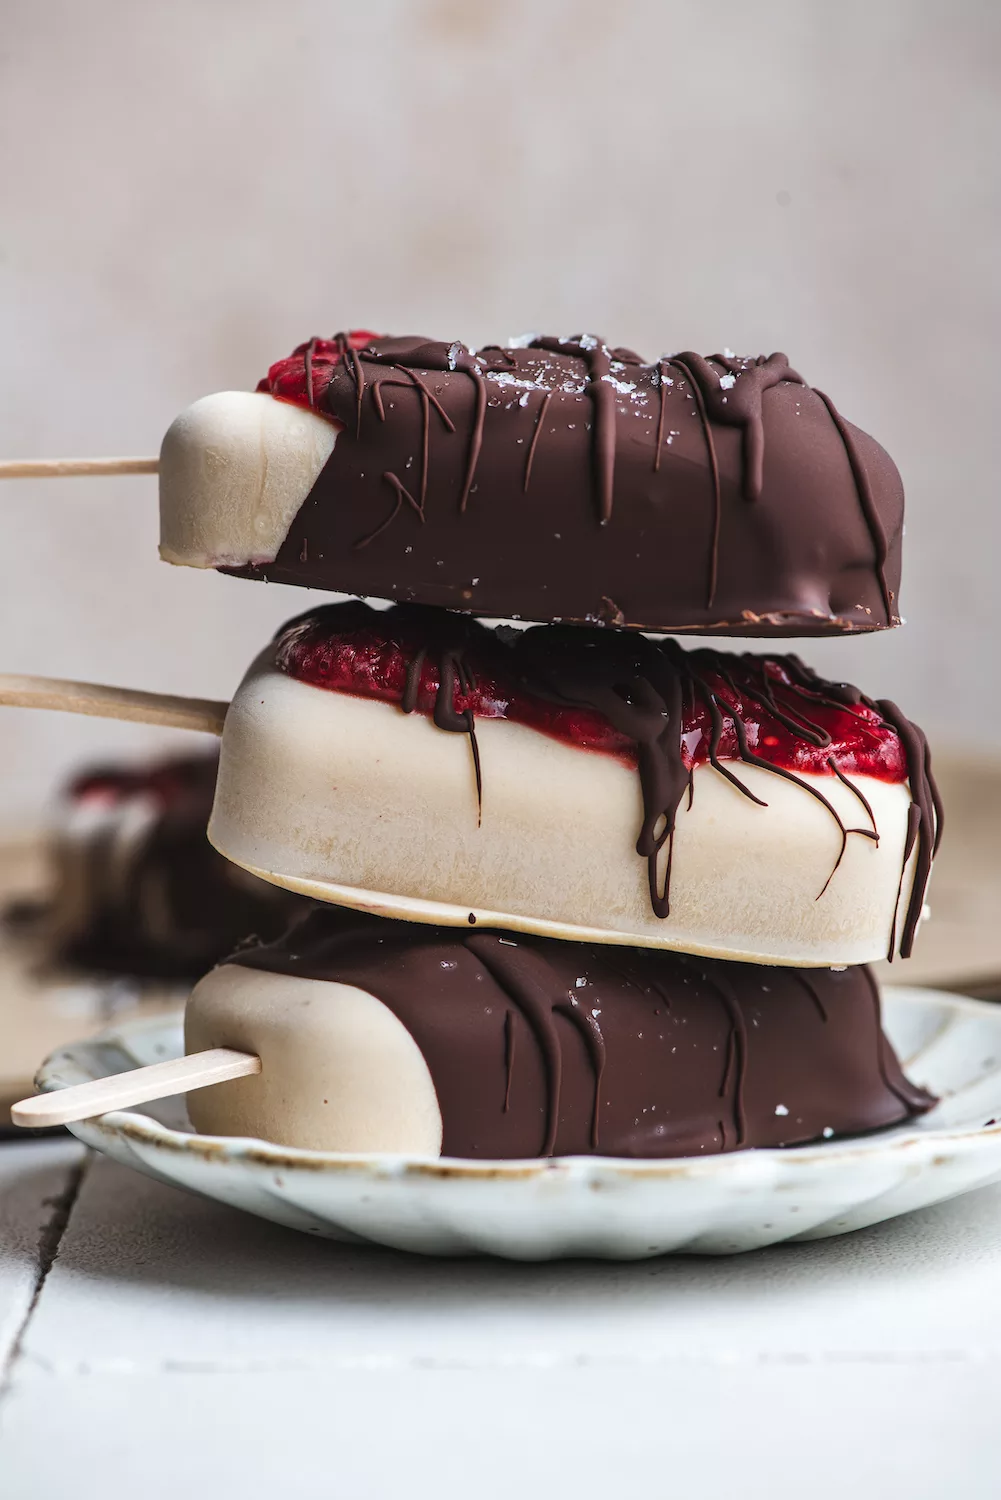 a stack of ice cream bars with strawberry jam oozing out of the chocolate dripped cover.